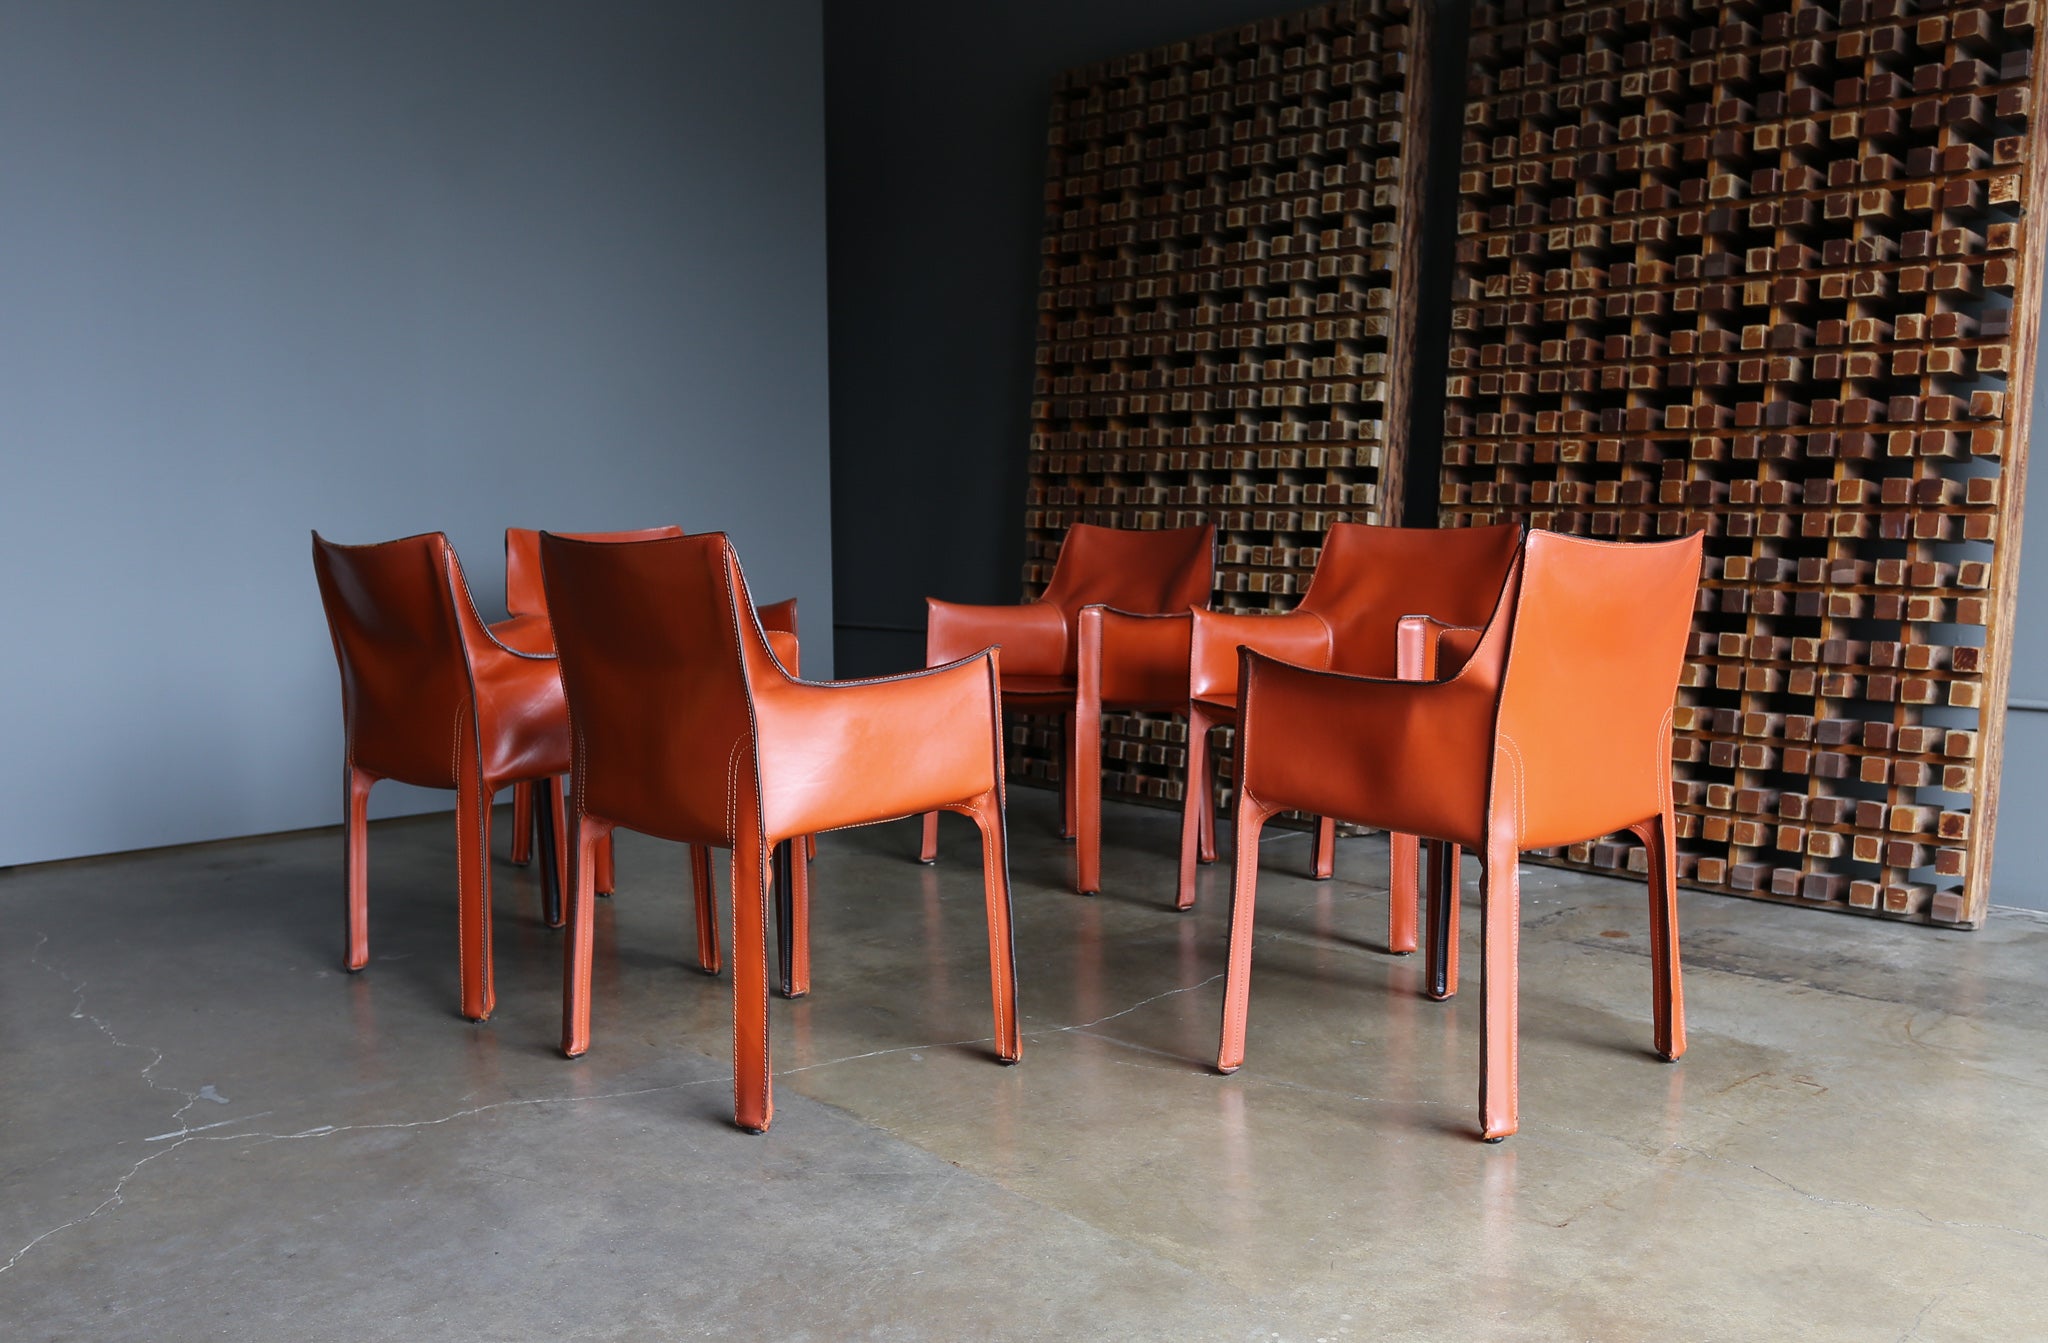 = SOLD = Mario Bellini Leather "Cab" Chairs for Cassina, circa 1985